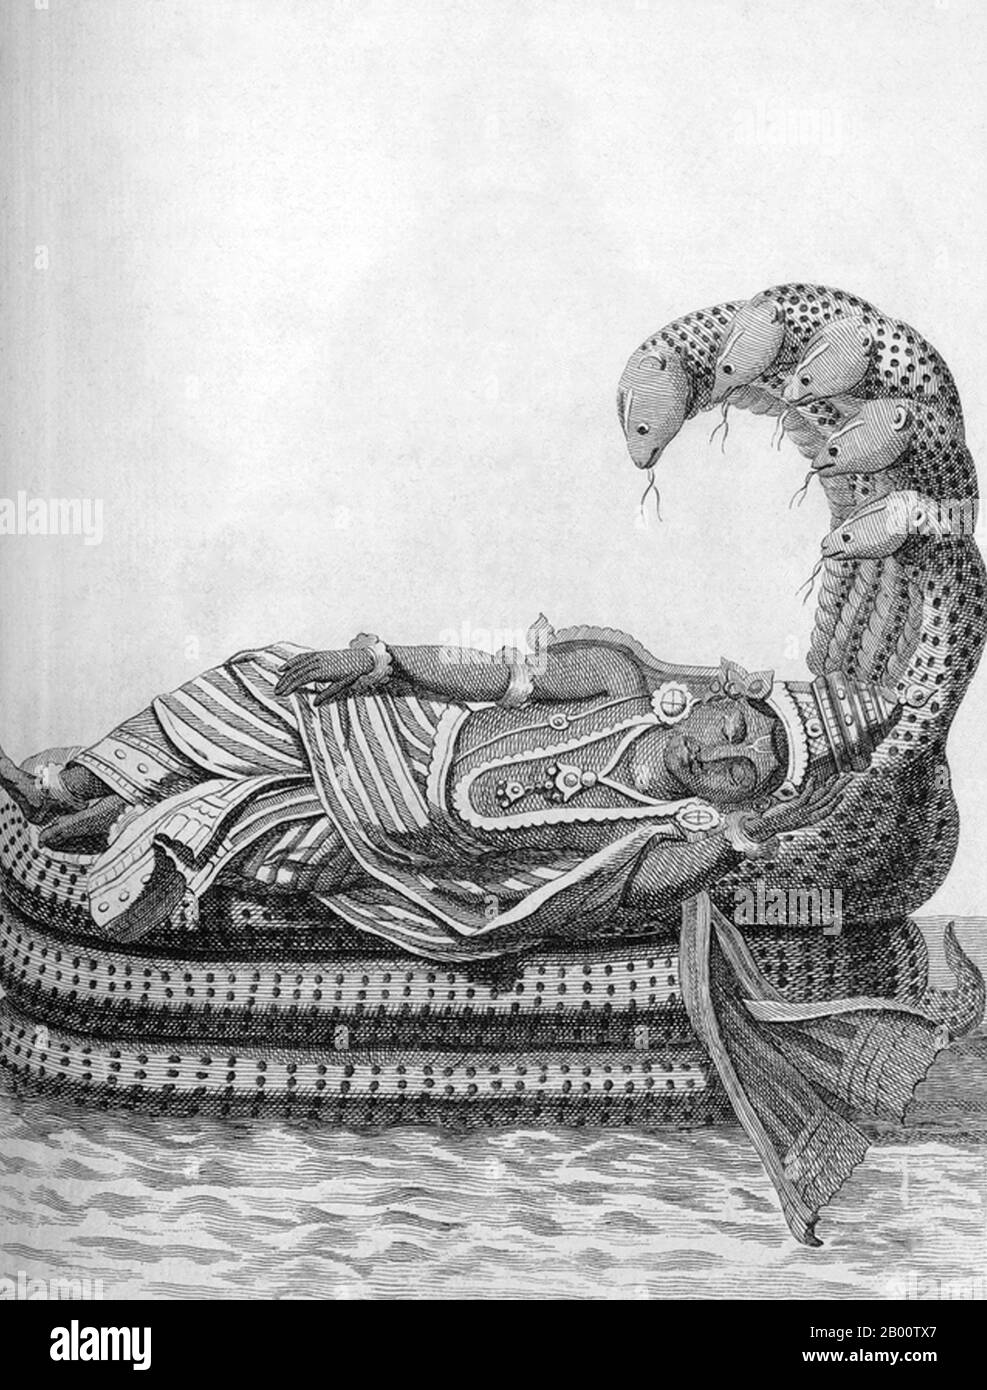 India: 'Vishnu sleeping on Adhi Shesha, his snake bed, in the infinite sea of milk'. Illustration by Pierre Sonnerat (1748-1814), 1782.  Pierre Sonnerat (1748-1814) was a French naturalist and explorer who made several voyages to southeast Asia between 1769 and 1781. He published this two-volume account of his voyage of 1774-81 in 1782.  Volume 1 deals exclusively with India, whose culture Sonnerat very much admired, and is especially noteworthy for its extended discussion of religion in India, Hinduism in particular. The book is illustrated with engravings based on Sonnerat’s drawings. Stock Photo